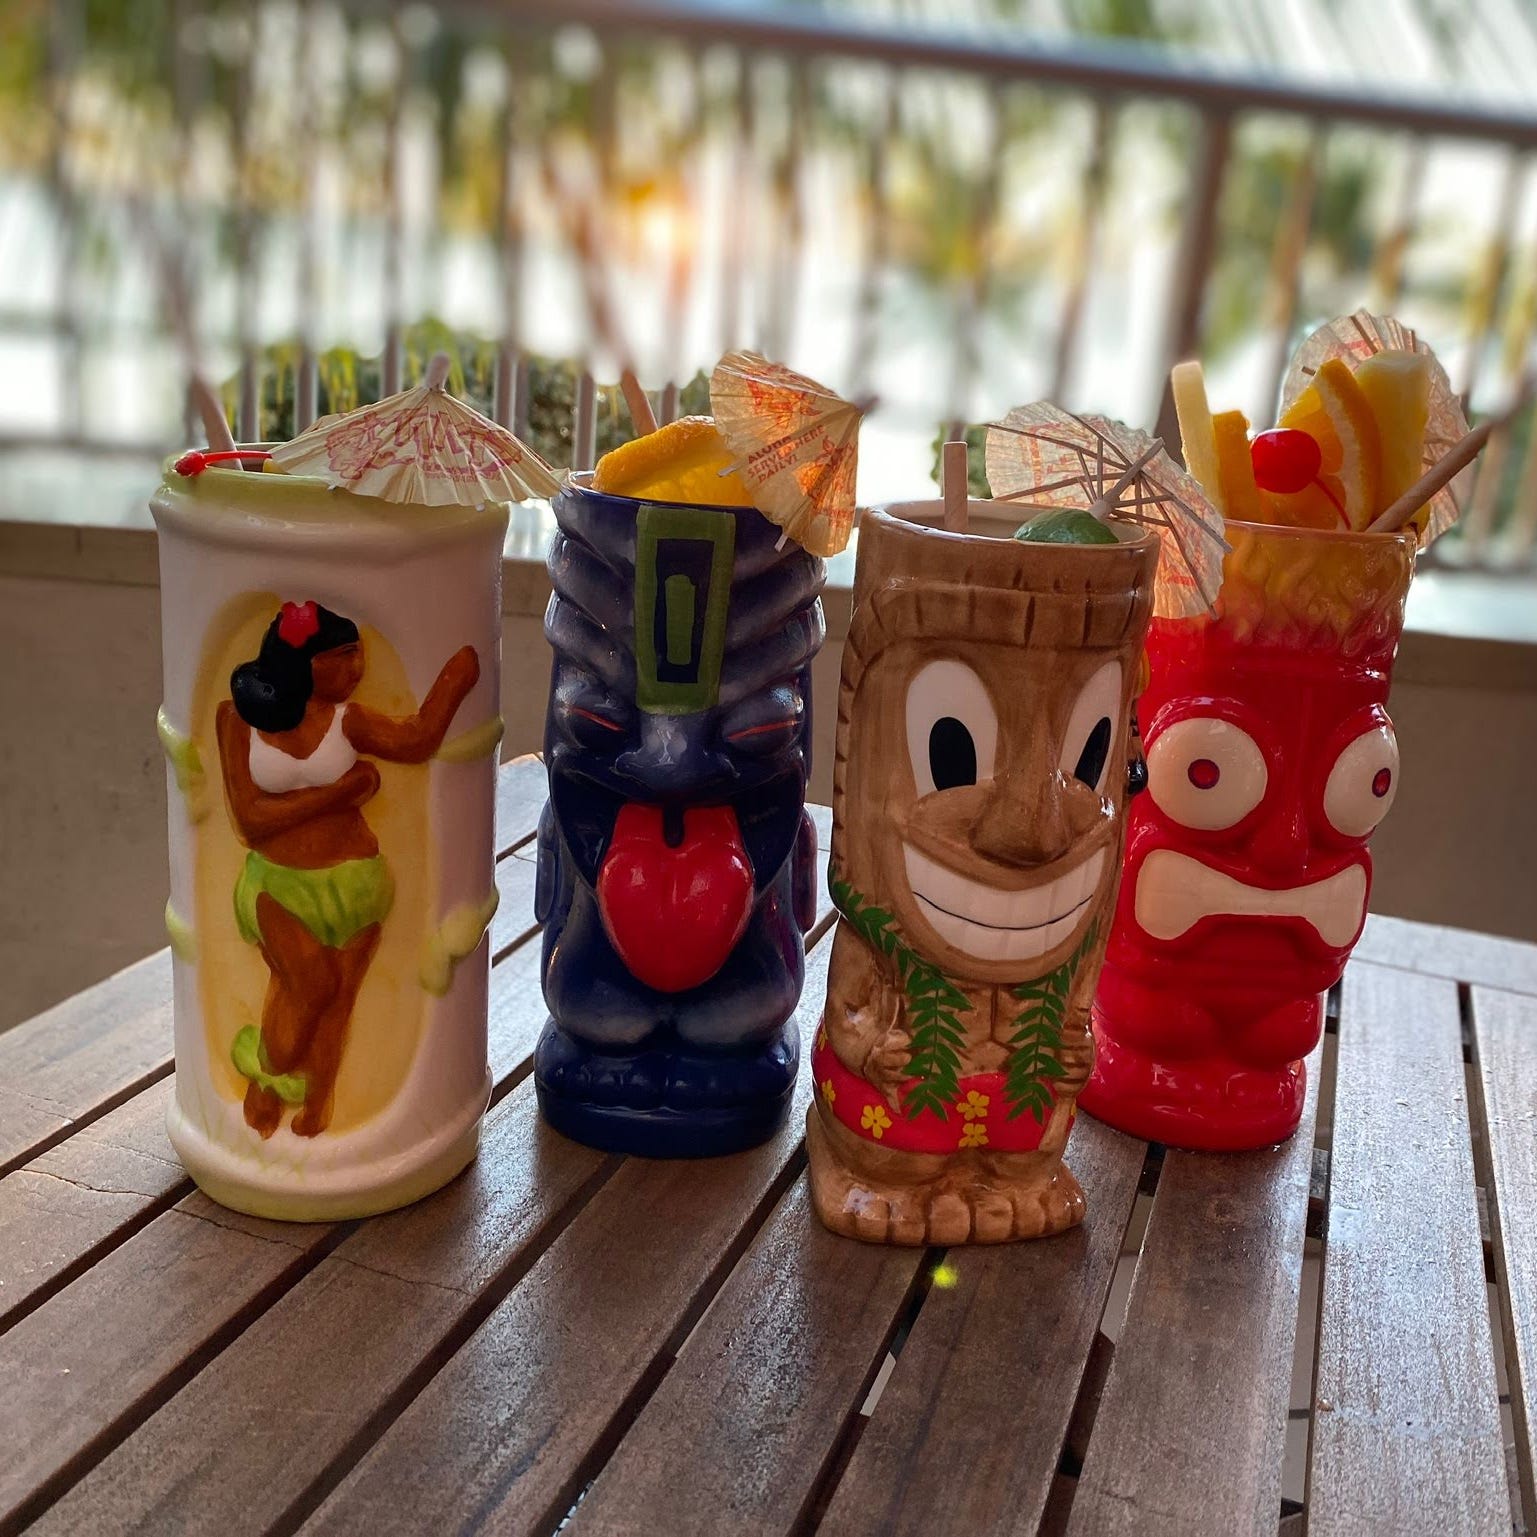 Tiki's sells drinks in cups that follow the typical tiki style.